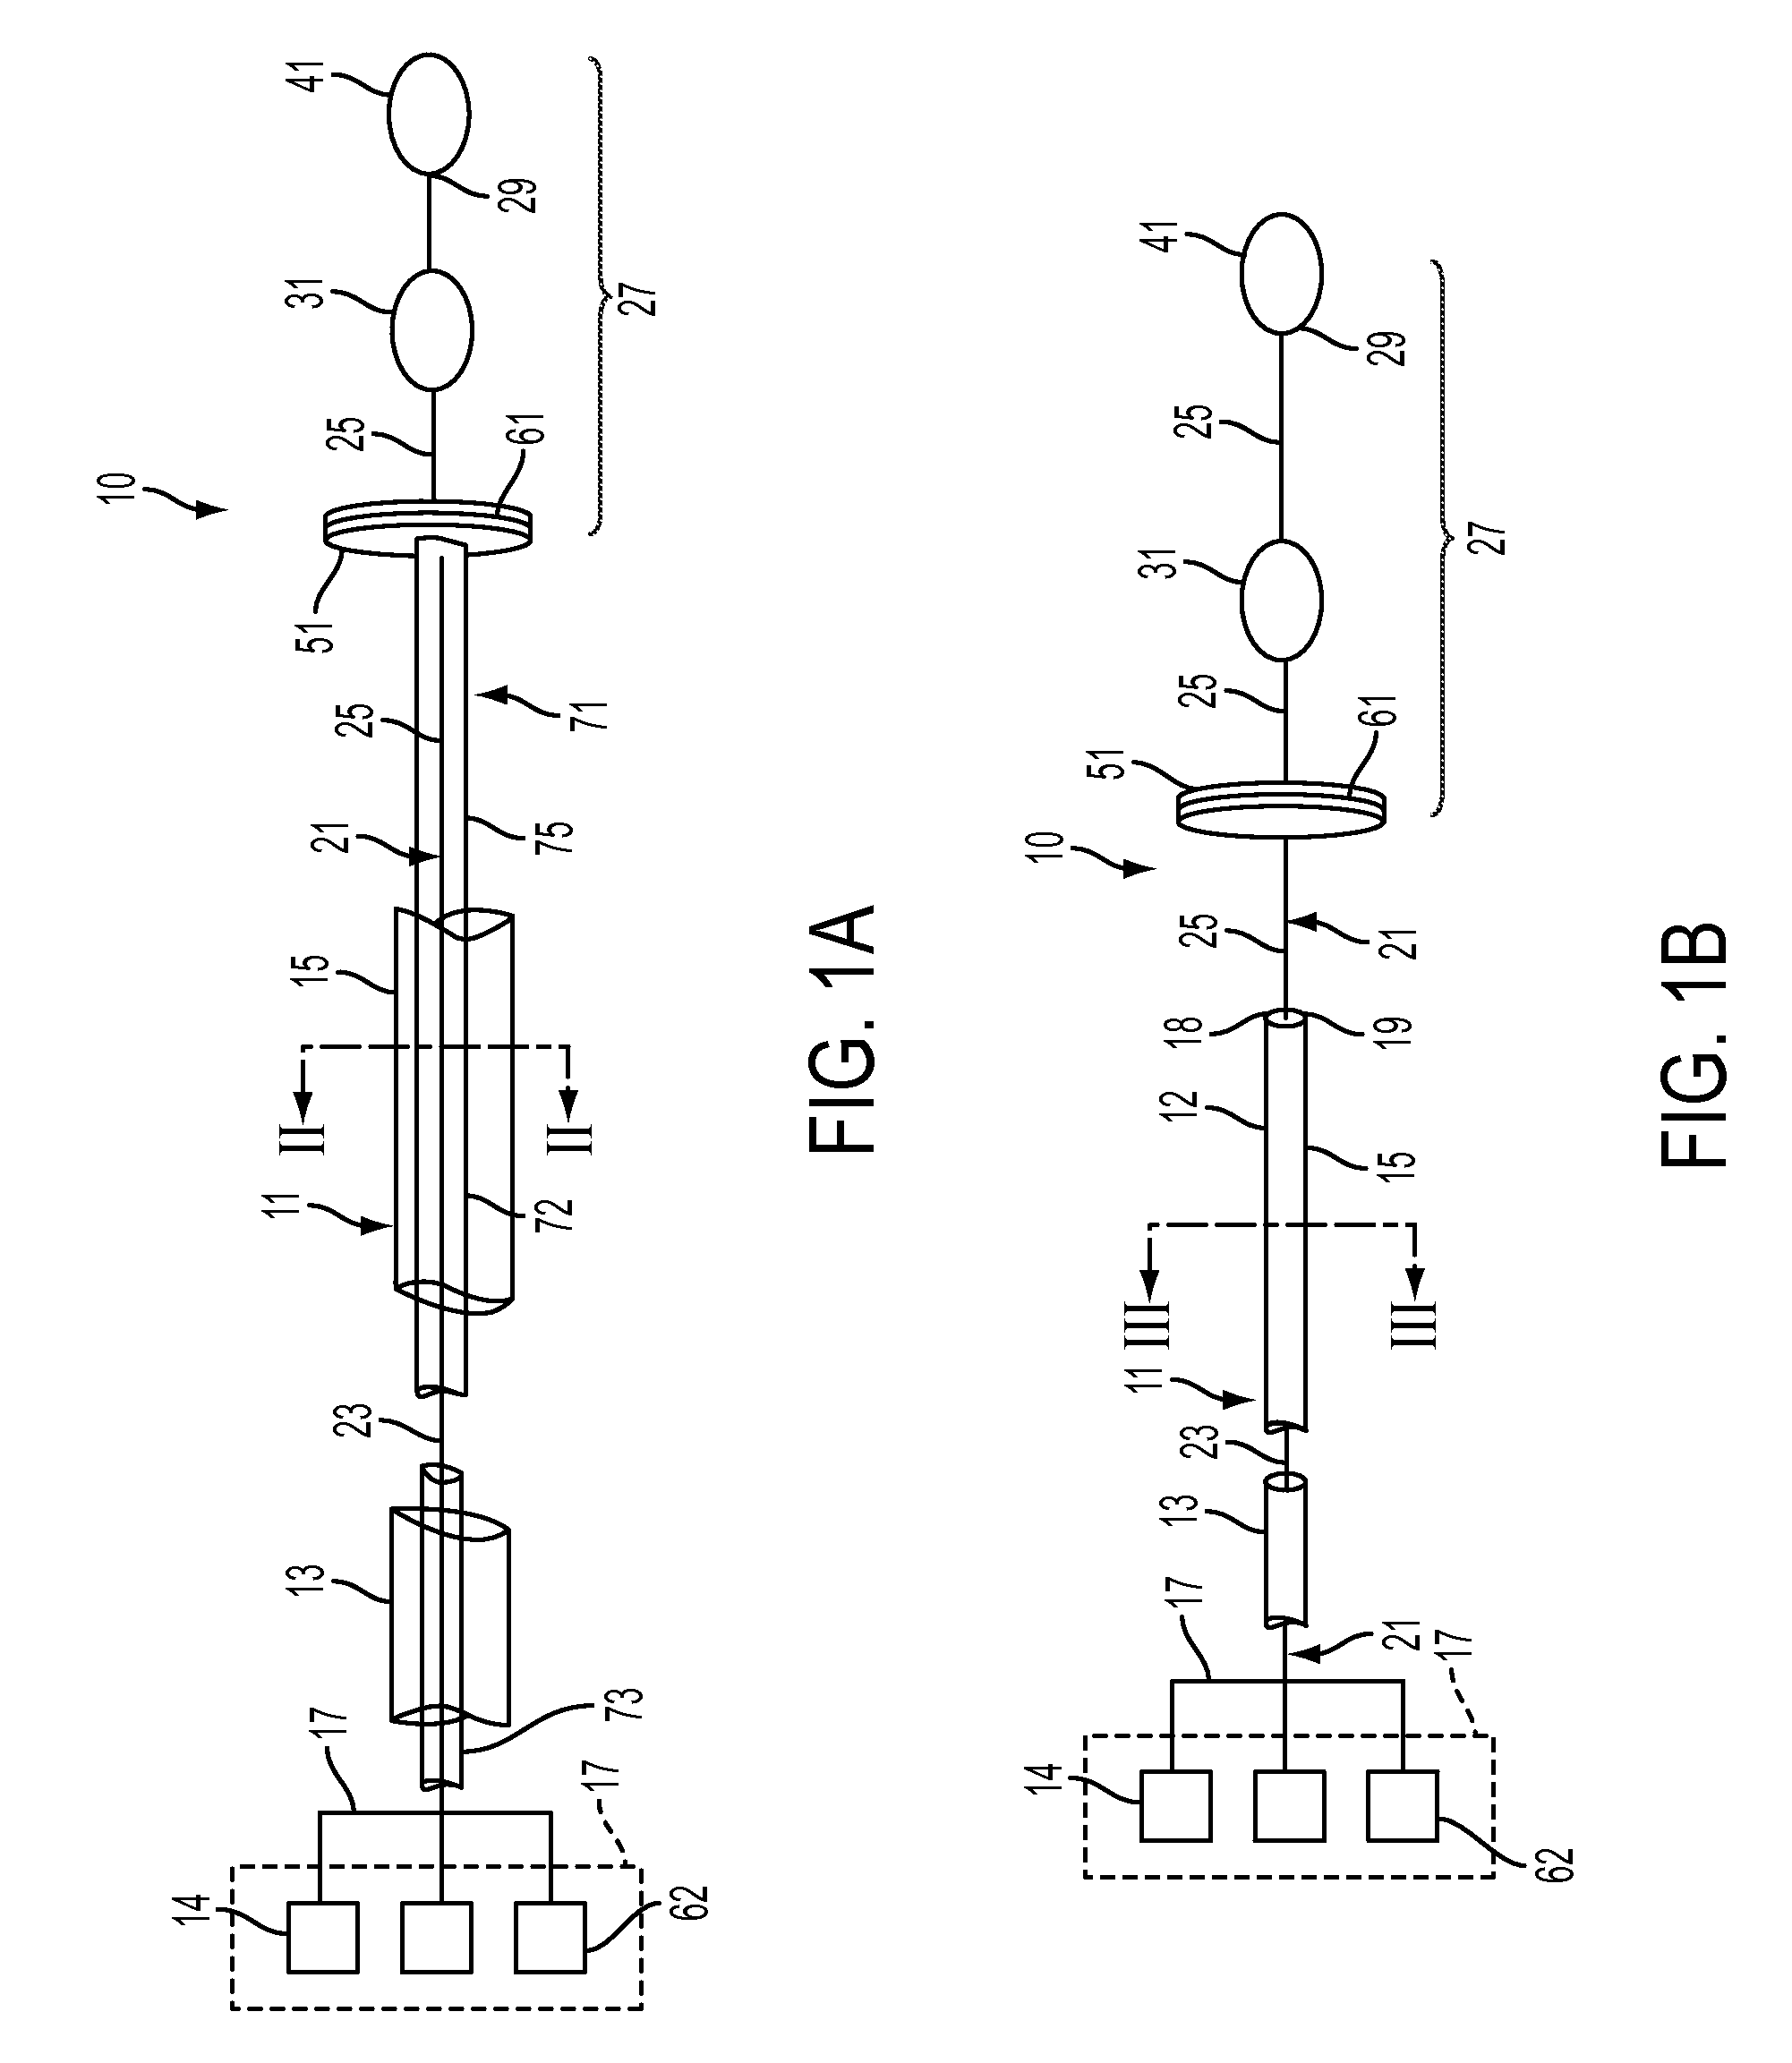 Circumferential ablation guide wire system and related method of using the same